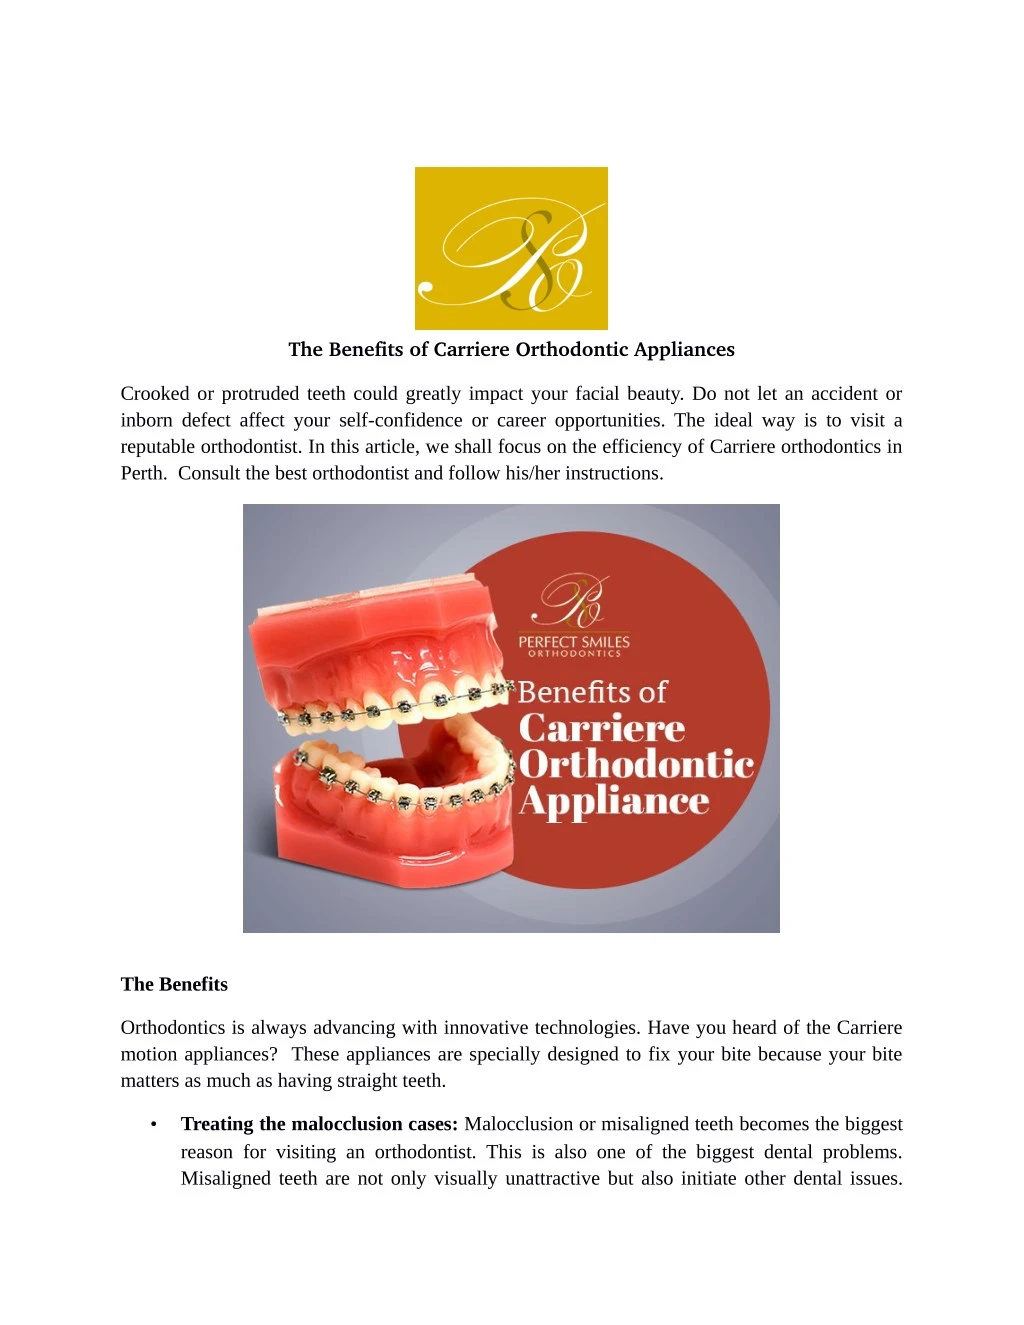 the benefits of carriere orthodontic appliances